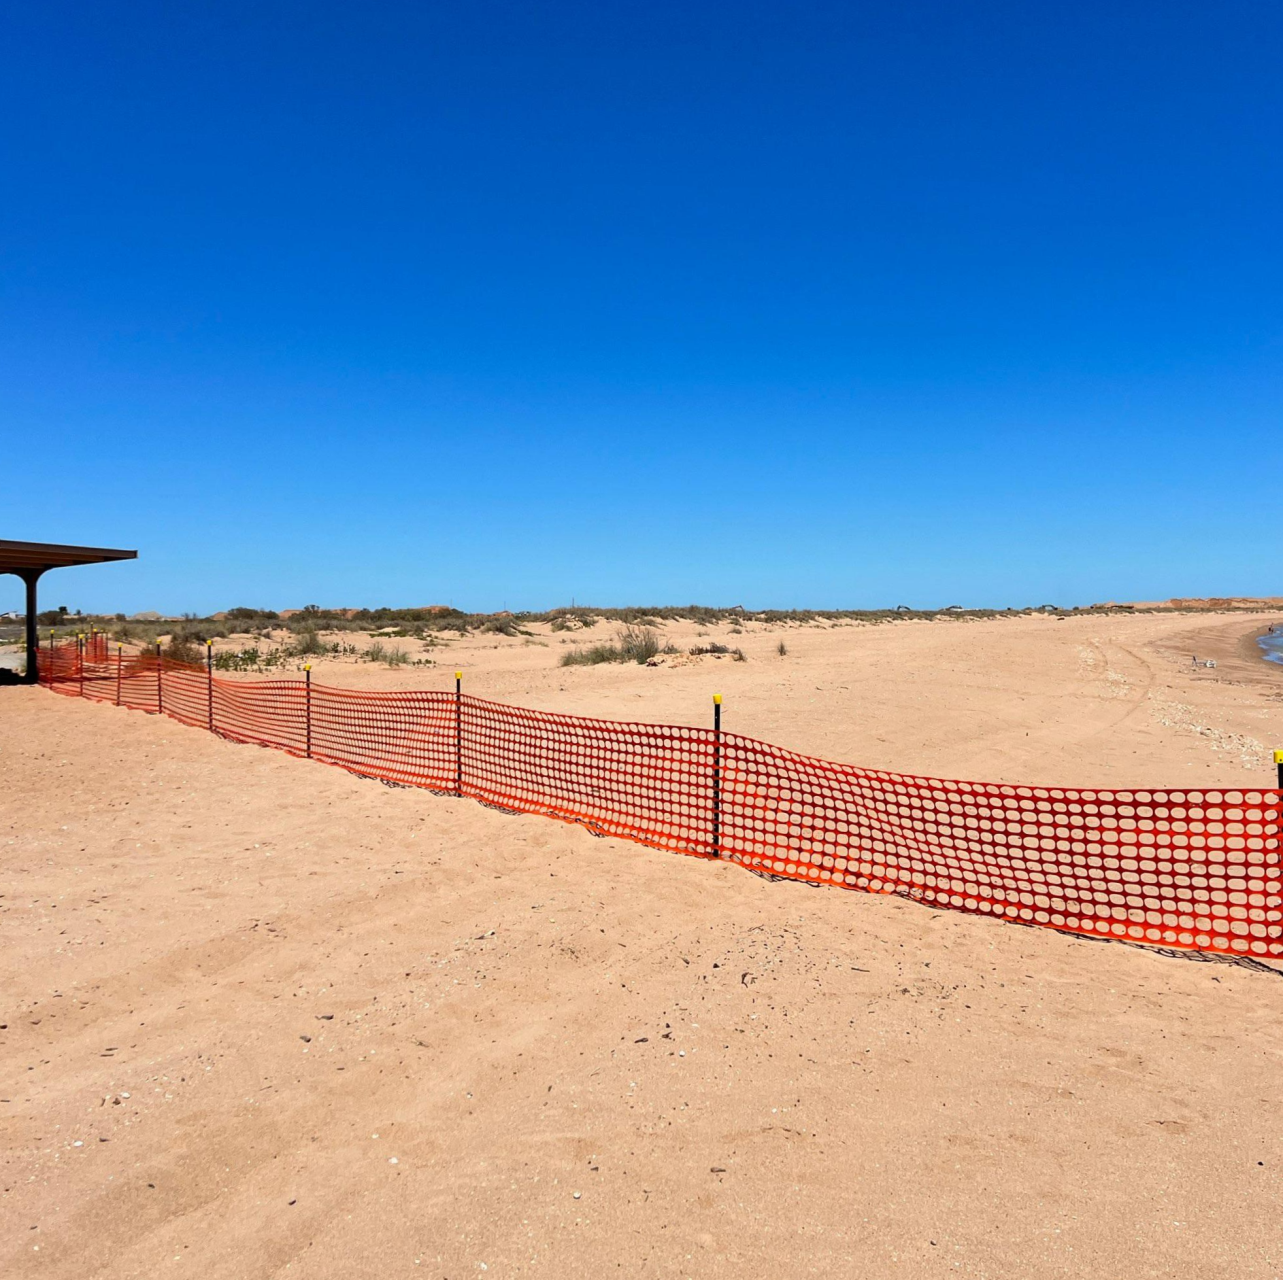 Spoilbank Beach access limited for turtle safety